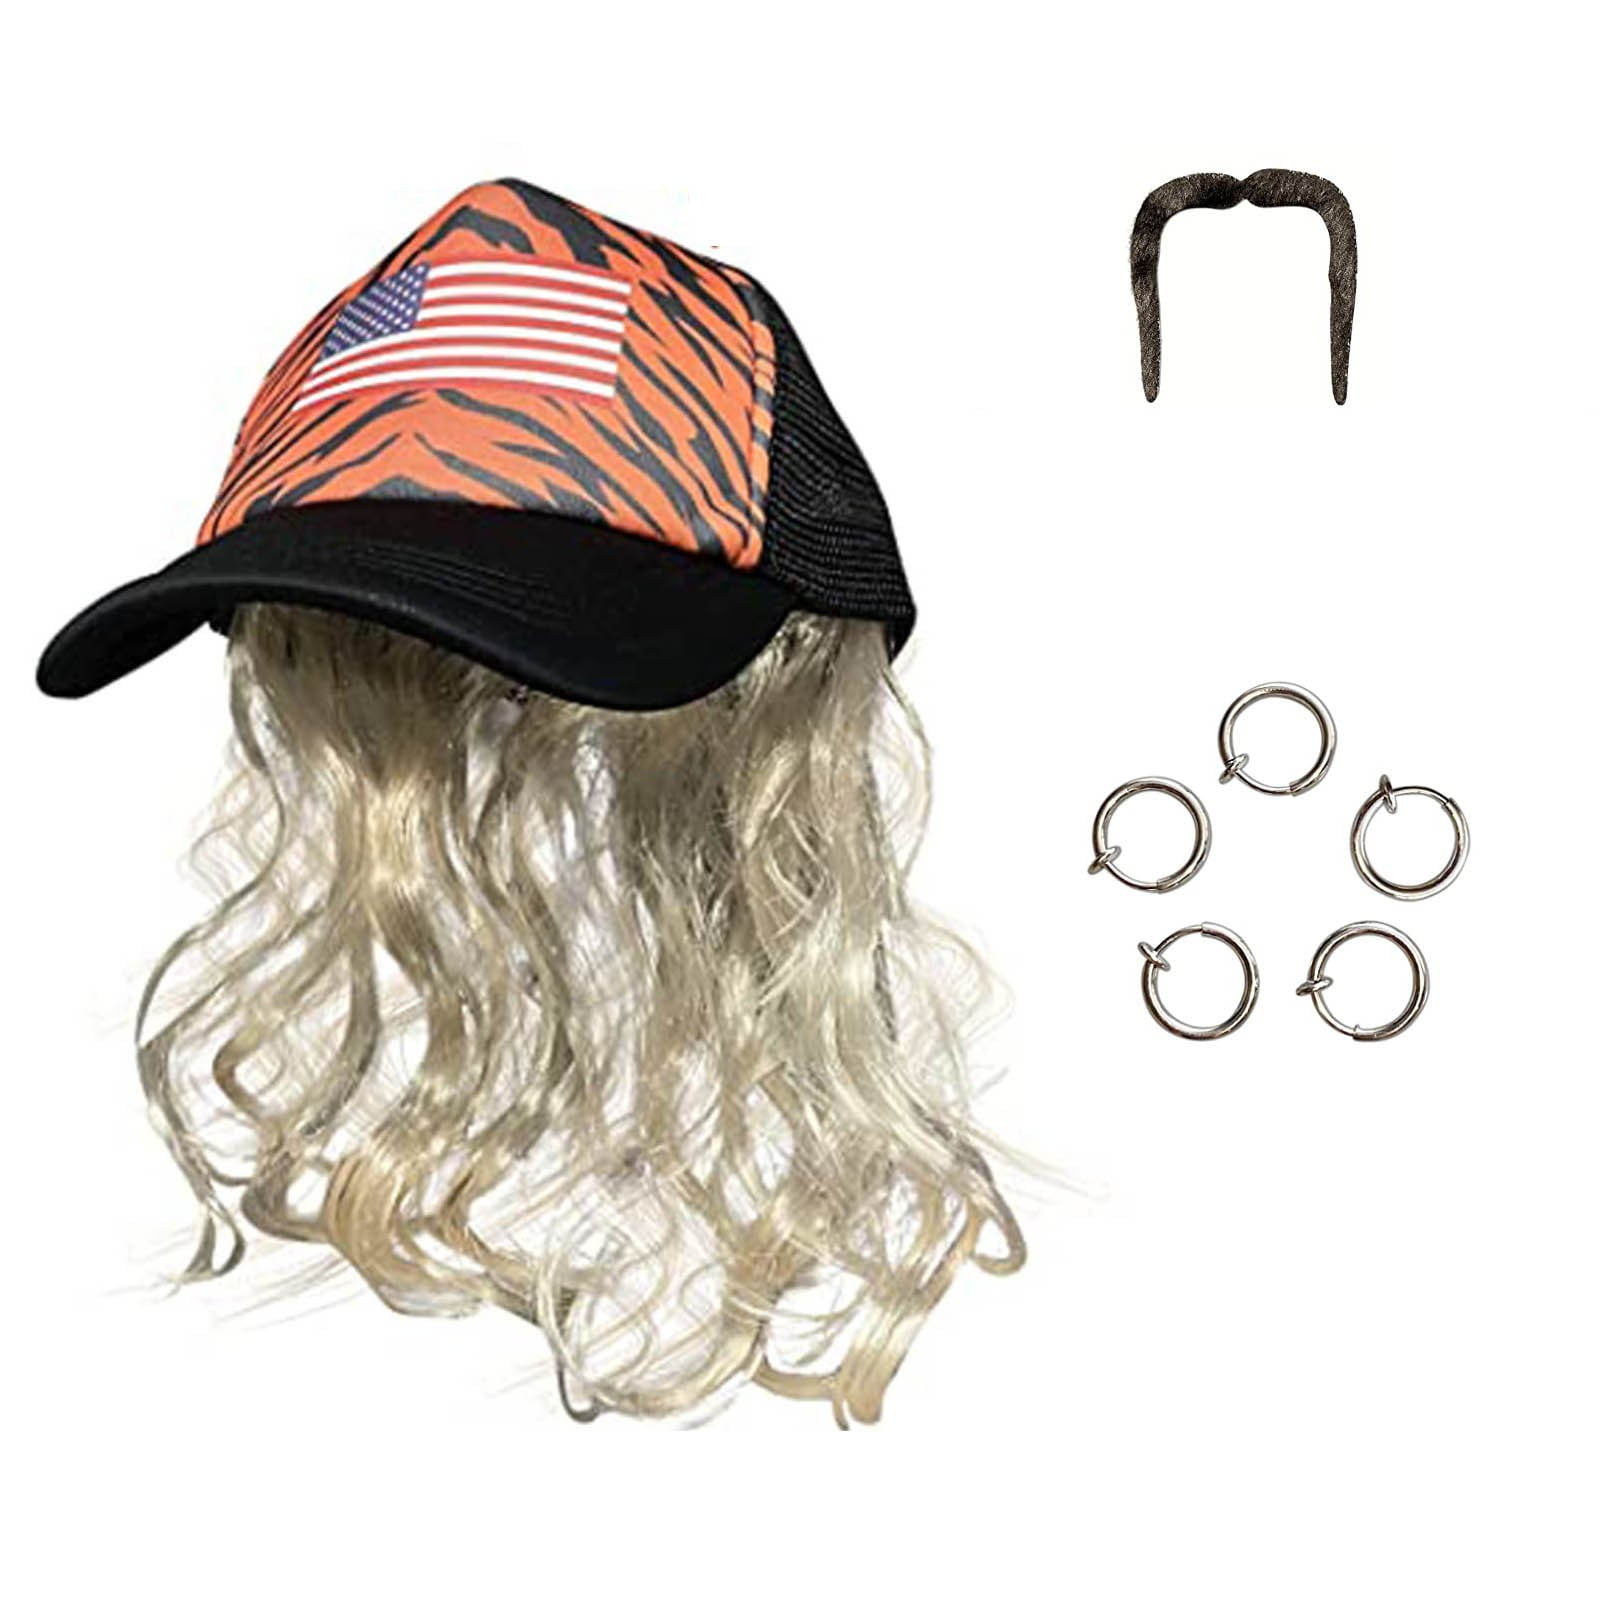 Attached Profile Hair Baseball For Hairpiece Kinky Baseball With Hat Wig Cap Curly Wave Hat Hair - Cap Low With Women Hair Synthetic Adjustable Hats Baseball L With Fedora Wig Extensions A